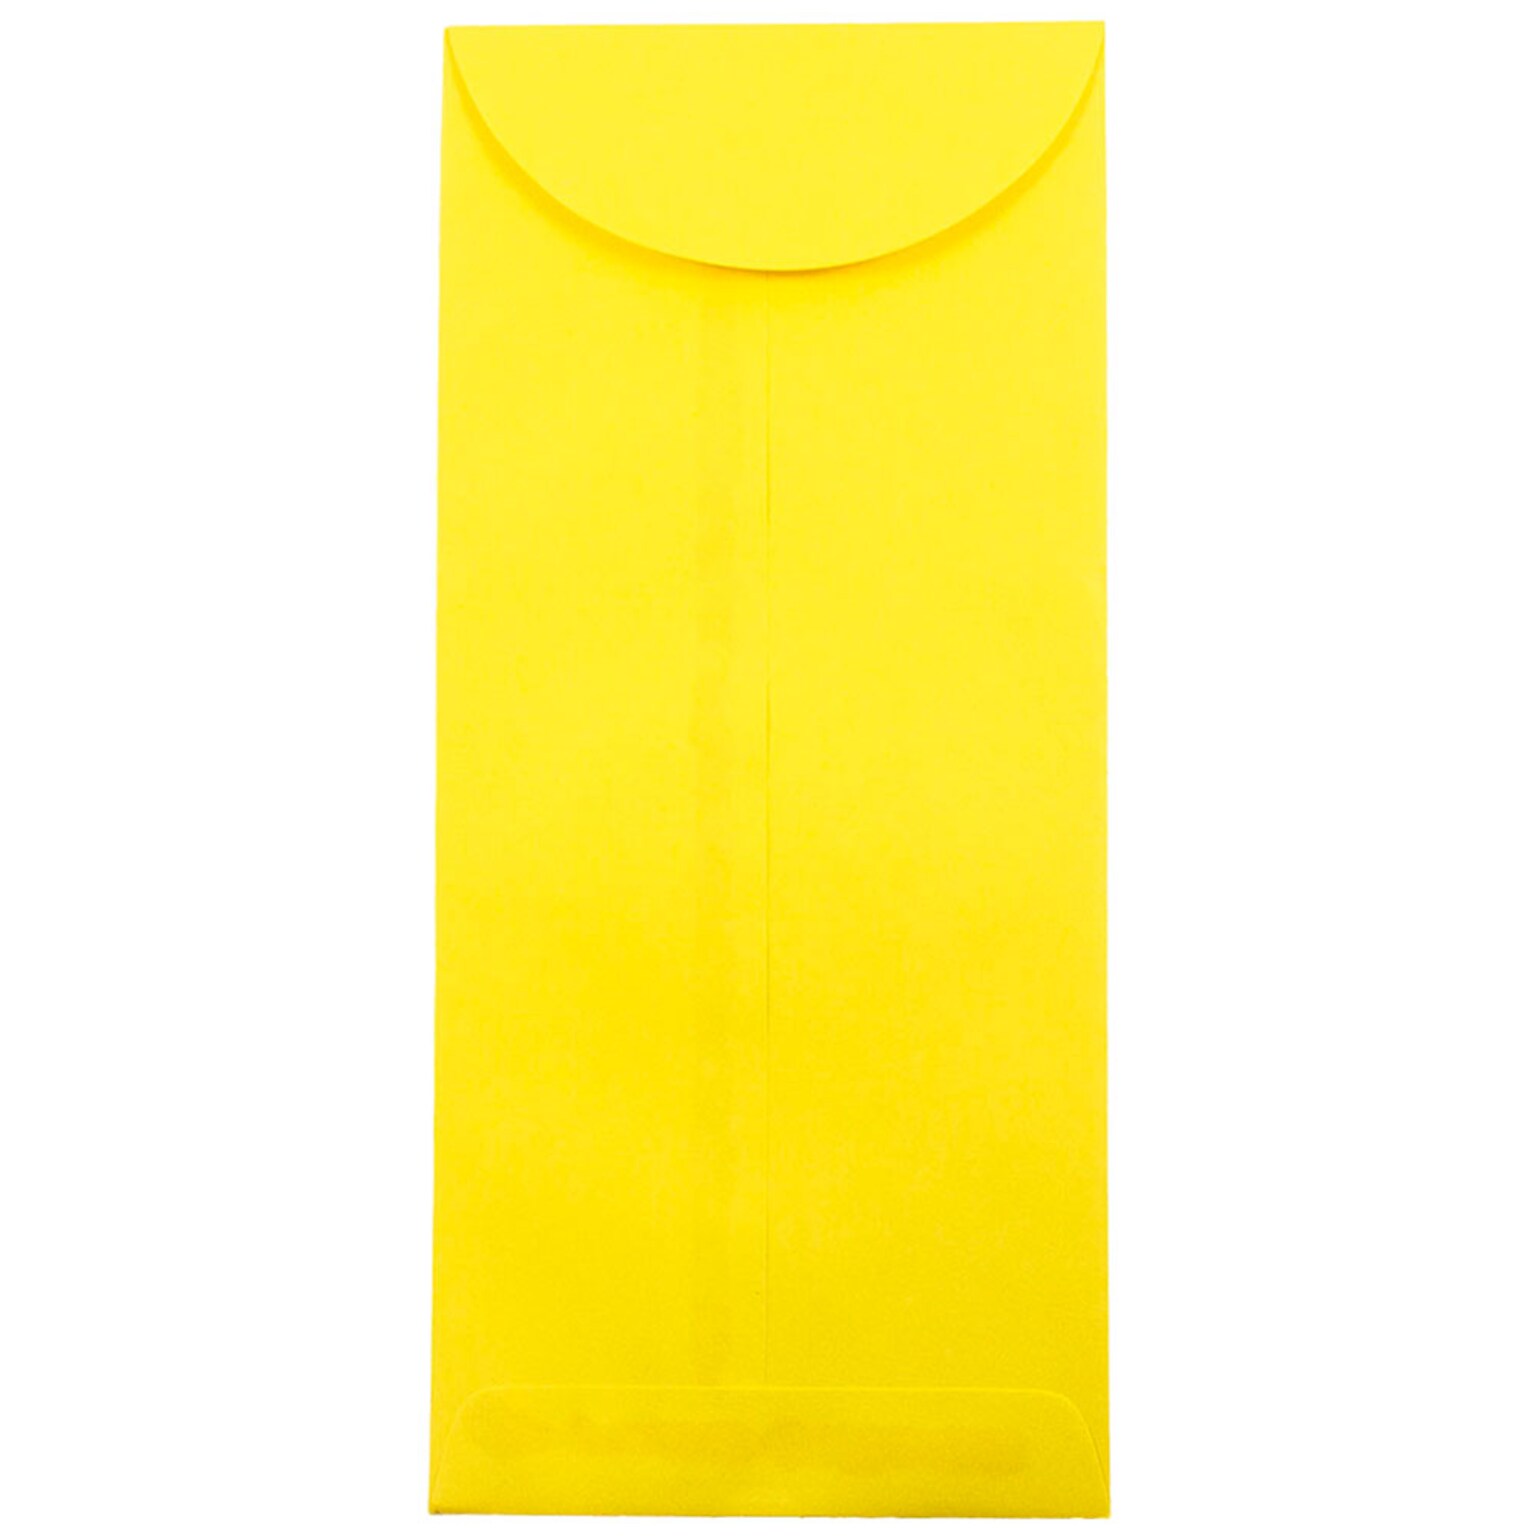 JAM Paper #14 Policy Business Commercial Envelope, 5 x 11 1/2, Yellow Brite Hue, 500/Pack (3156404H)